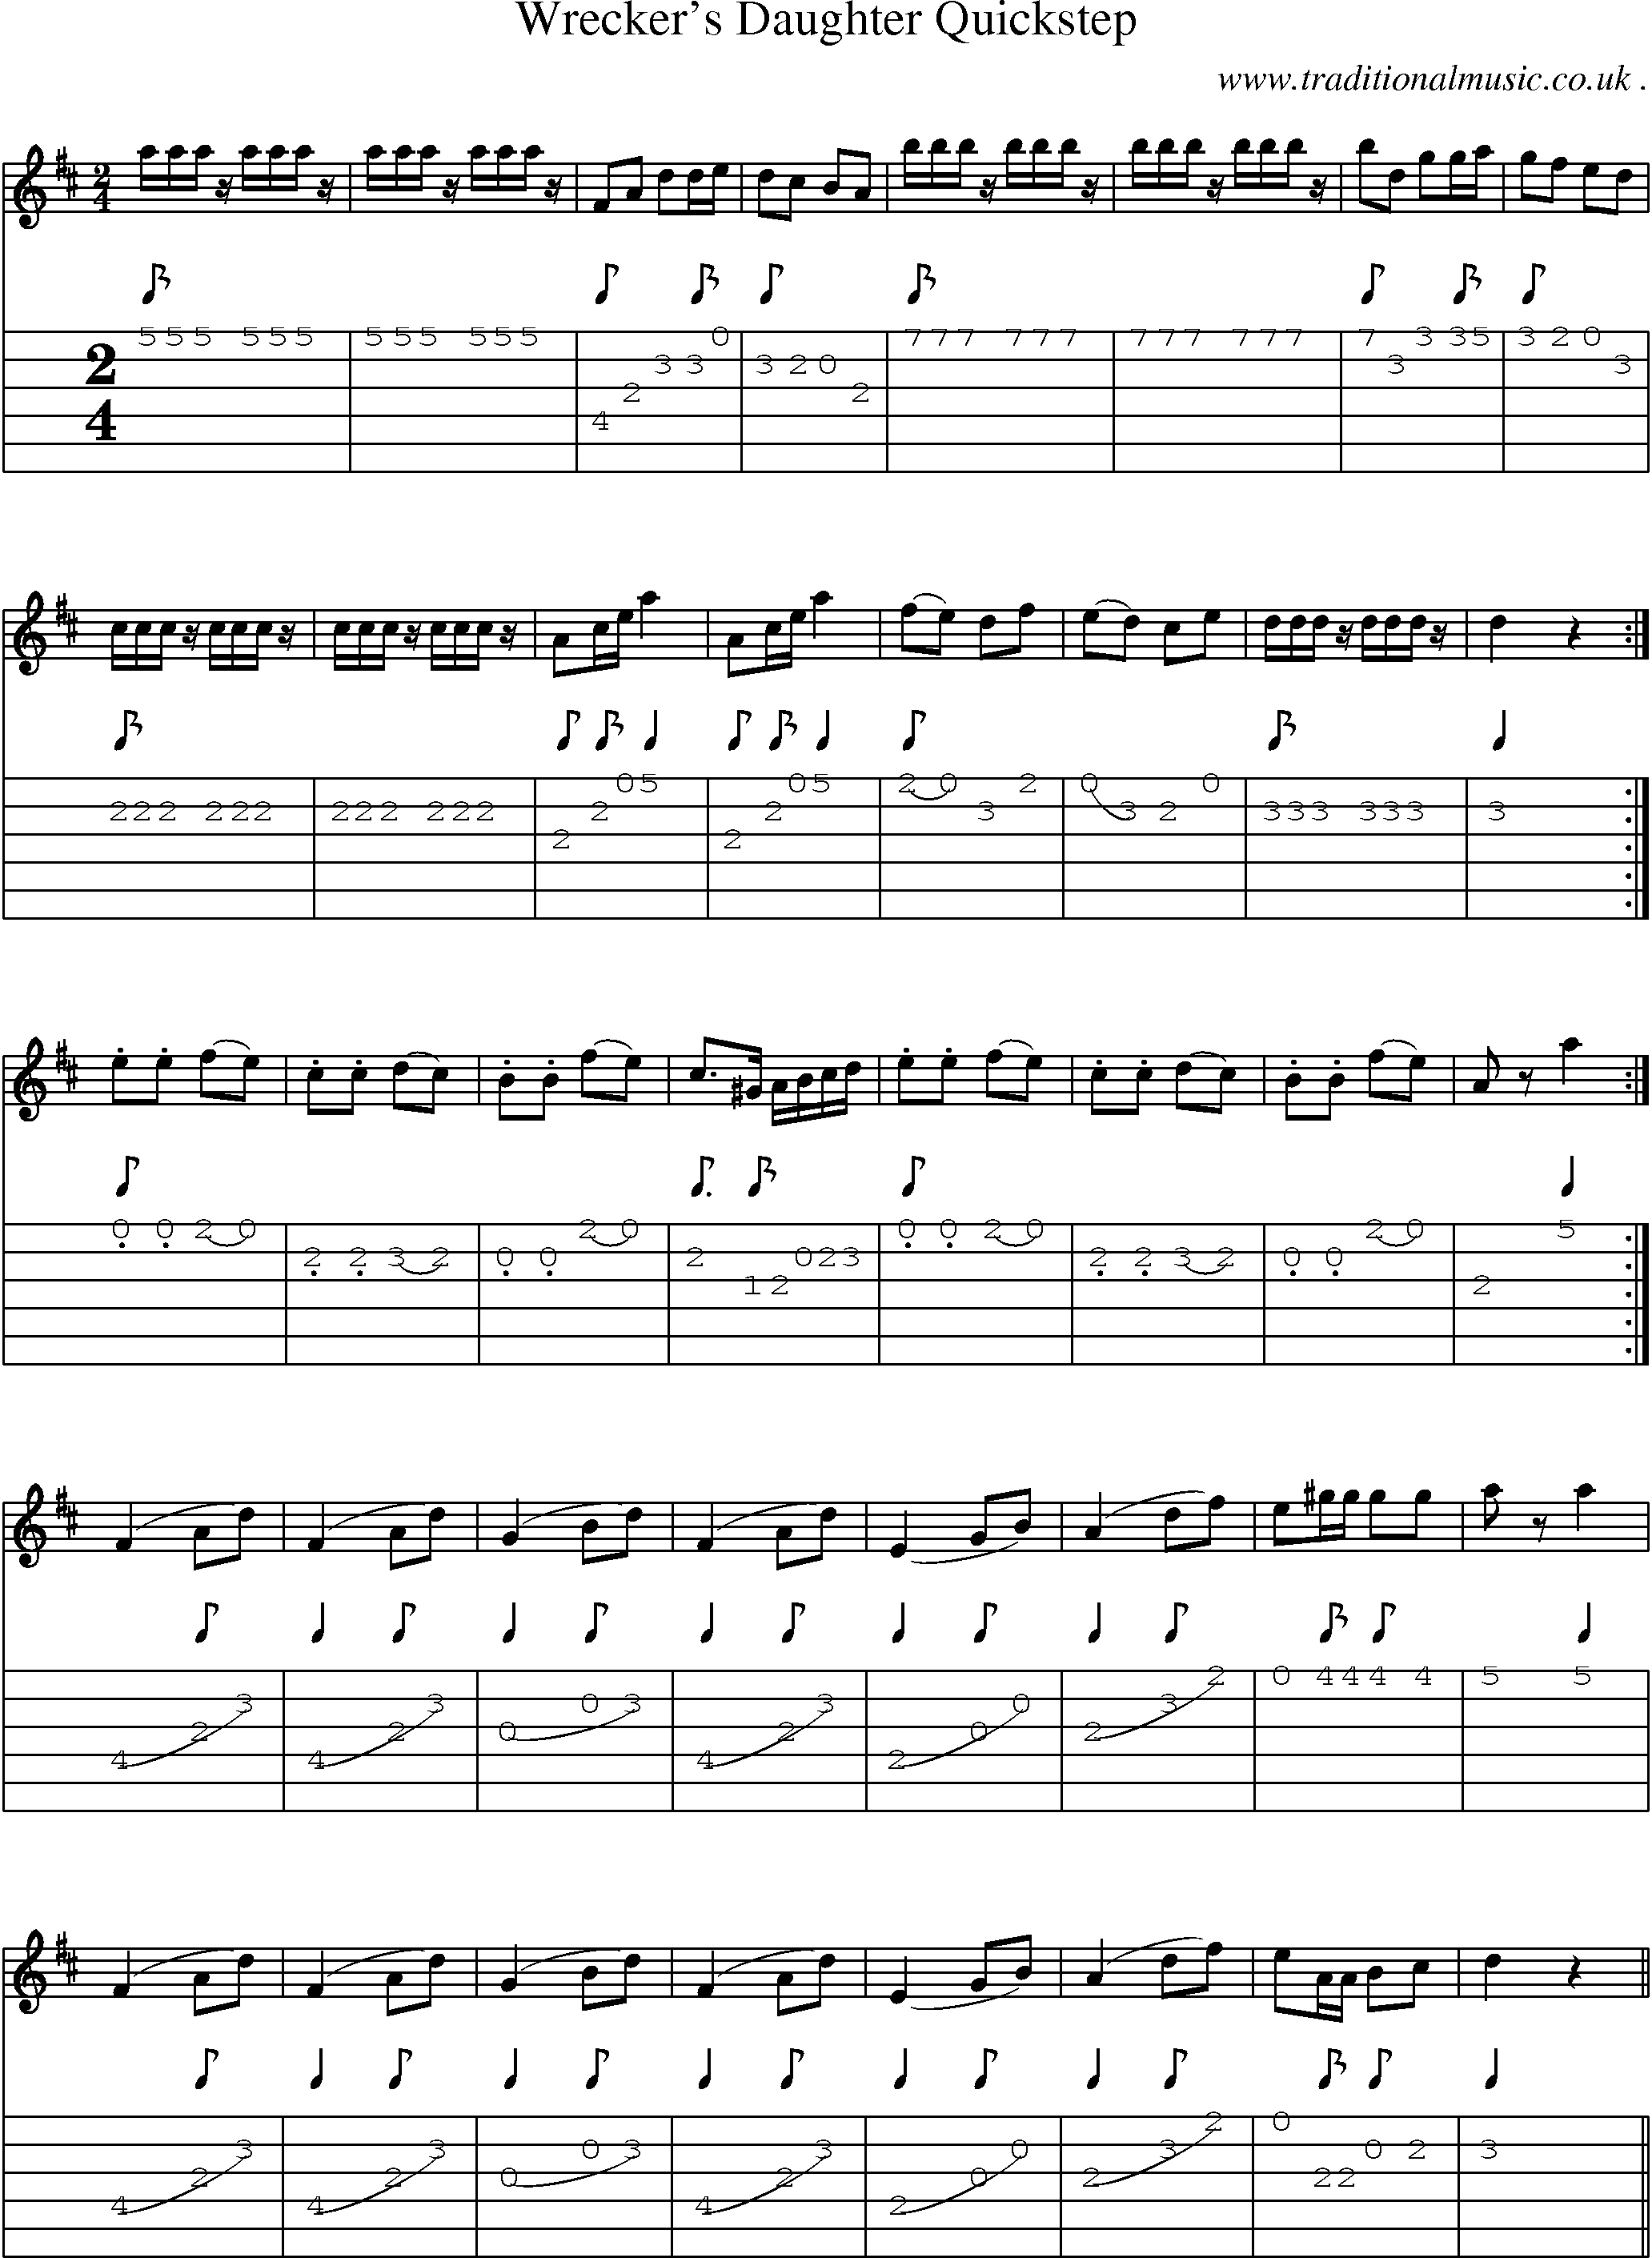 Sheet-Music and Guitar Tabs for Wreckers Daughter Quickstep